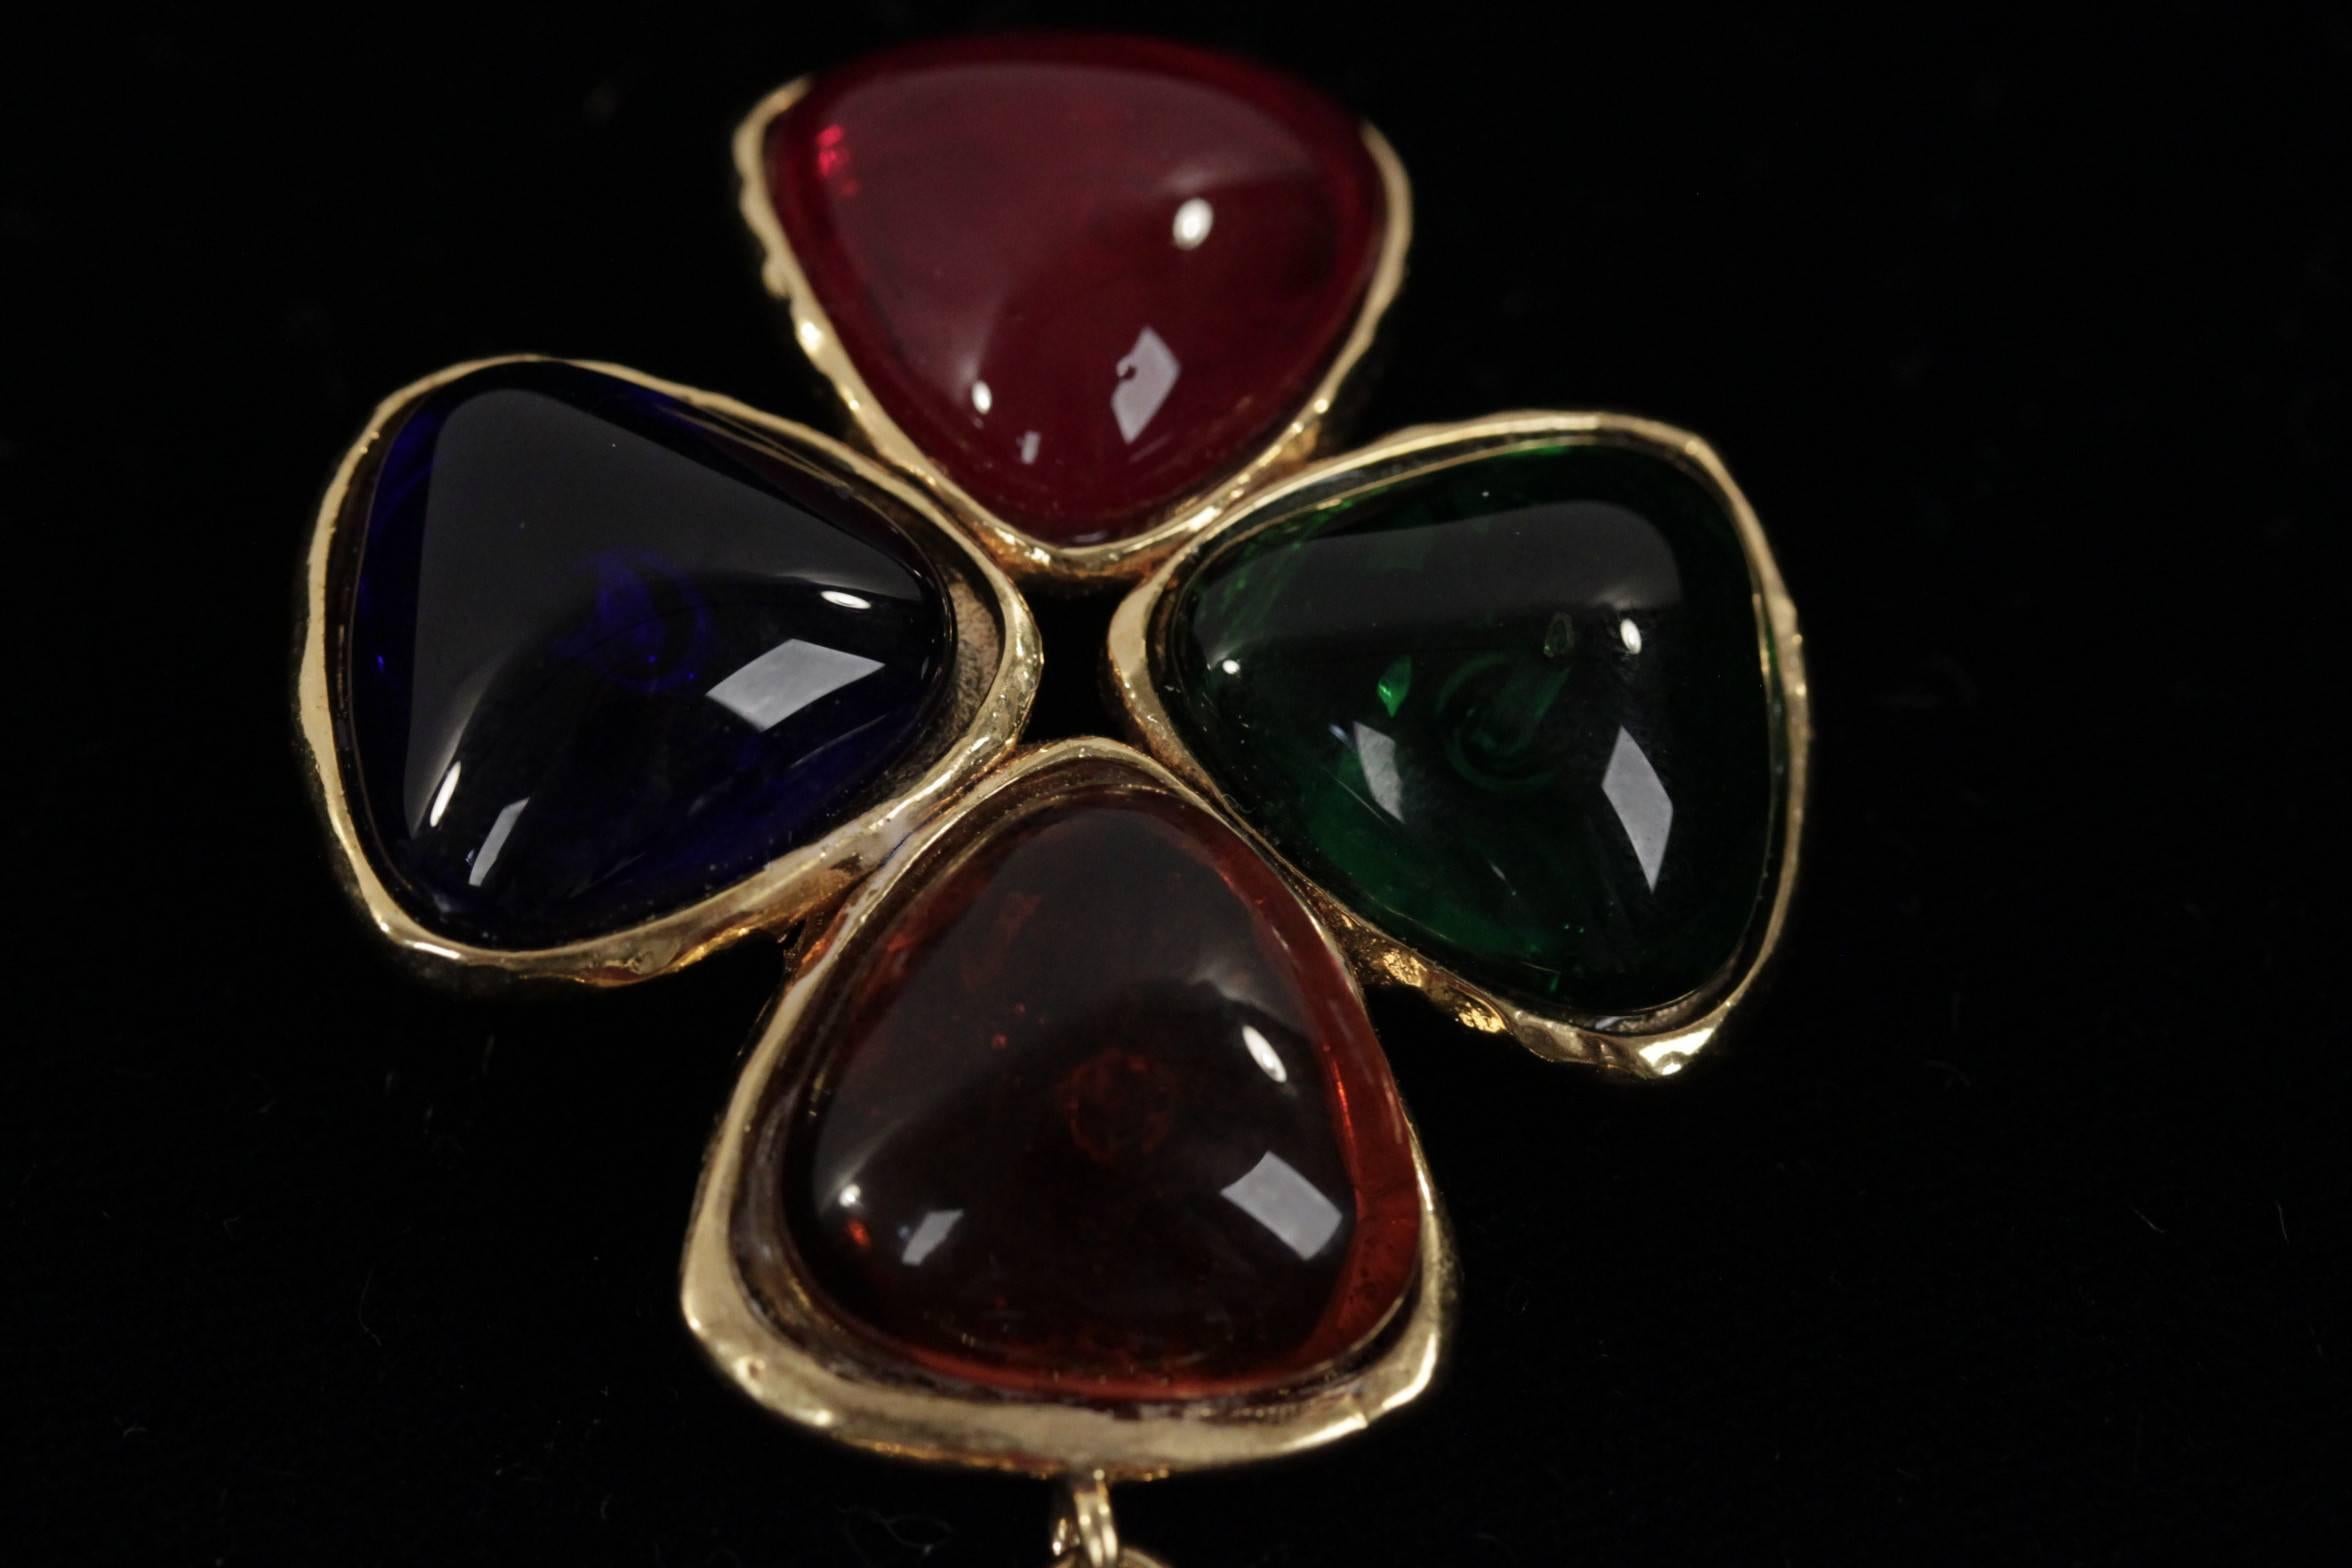  Gorgeous CHANEL Gripoix poured glass brooch or pendant. Brooch is finished in a shiny golden mounting, with multicolor poured glass cabochons. The central focus is the iconic clover - Hook on the back. This brooch is from the 1994 fall collection.